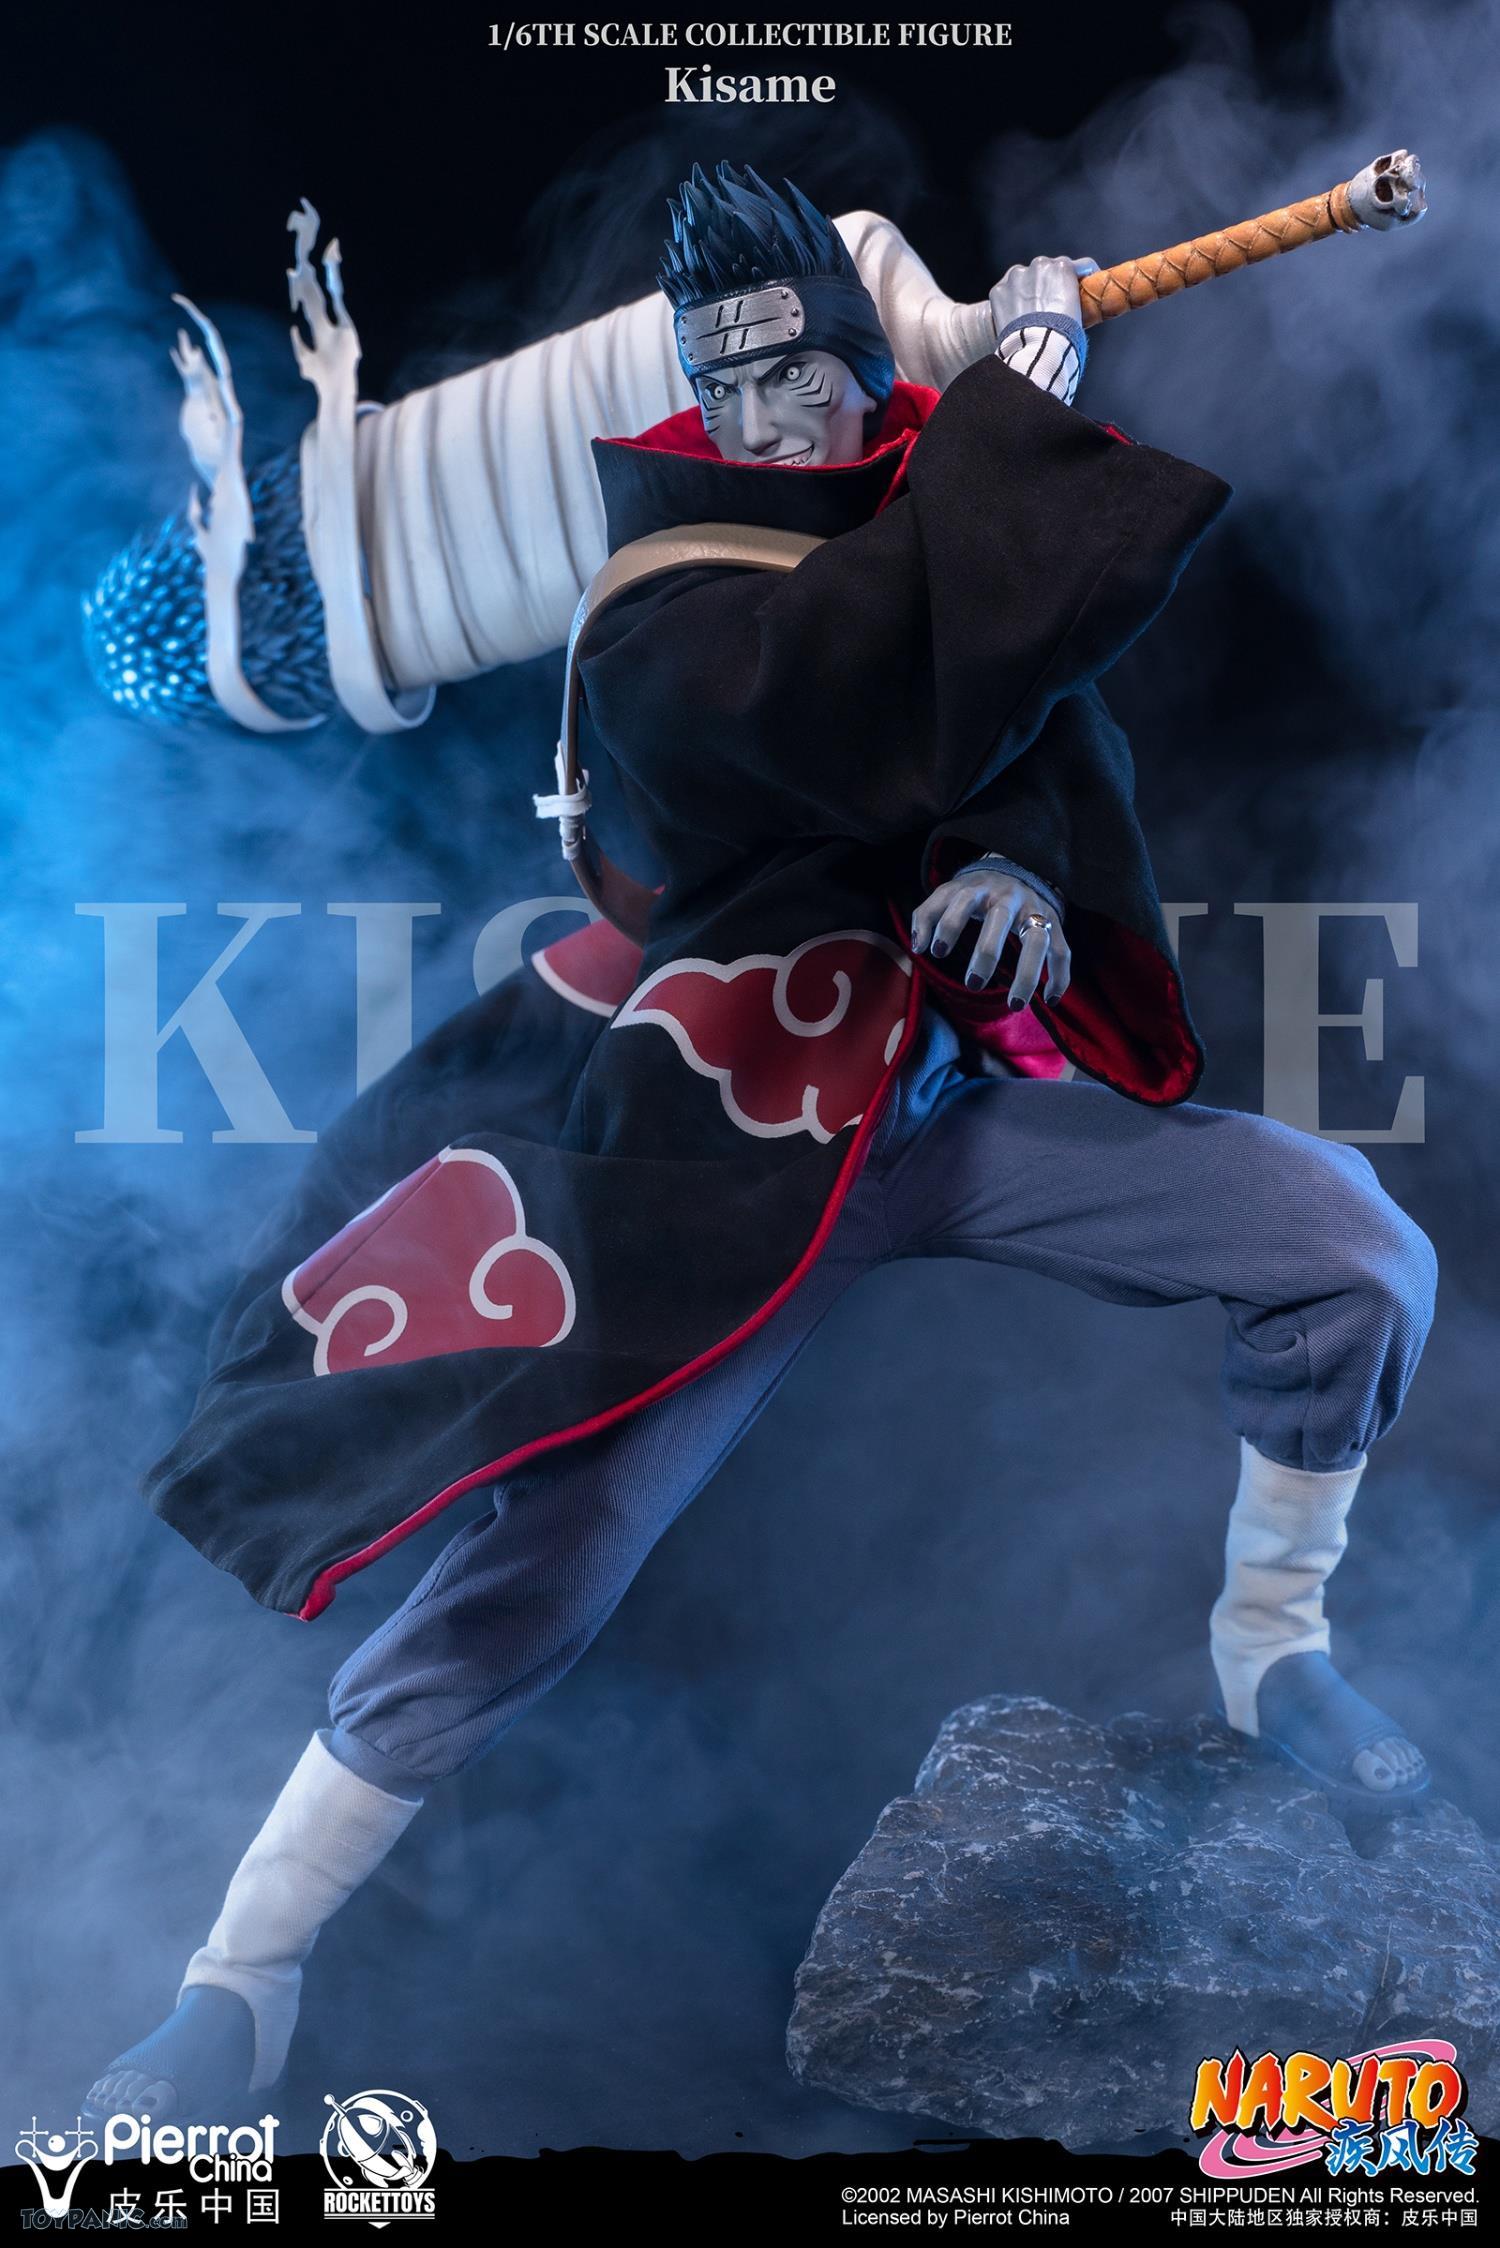 Fantasy - NEW PRODUCT: Rocket Toys ROC-007 1/6 Scale Kisame 221202460435PM_6417009